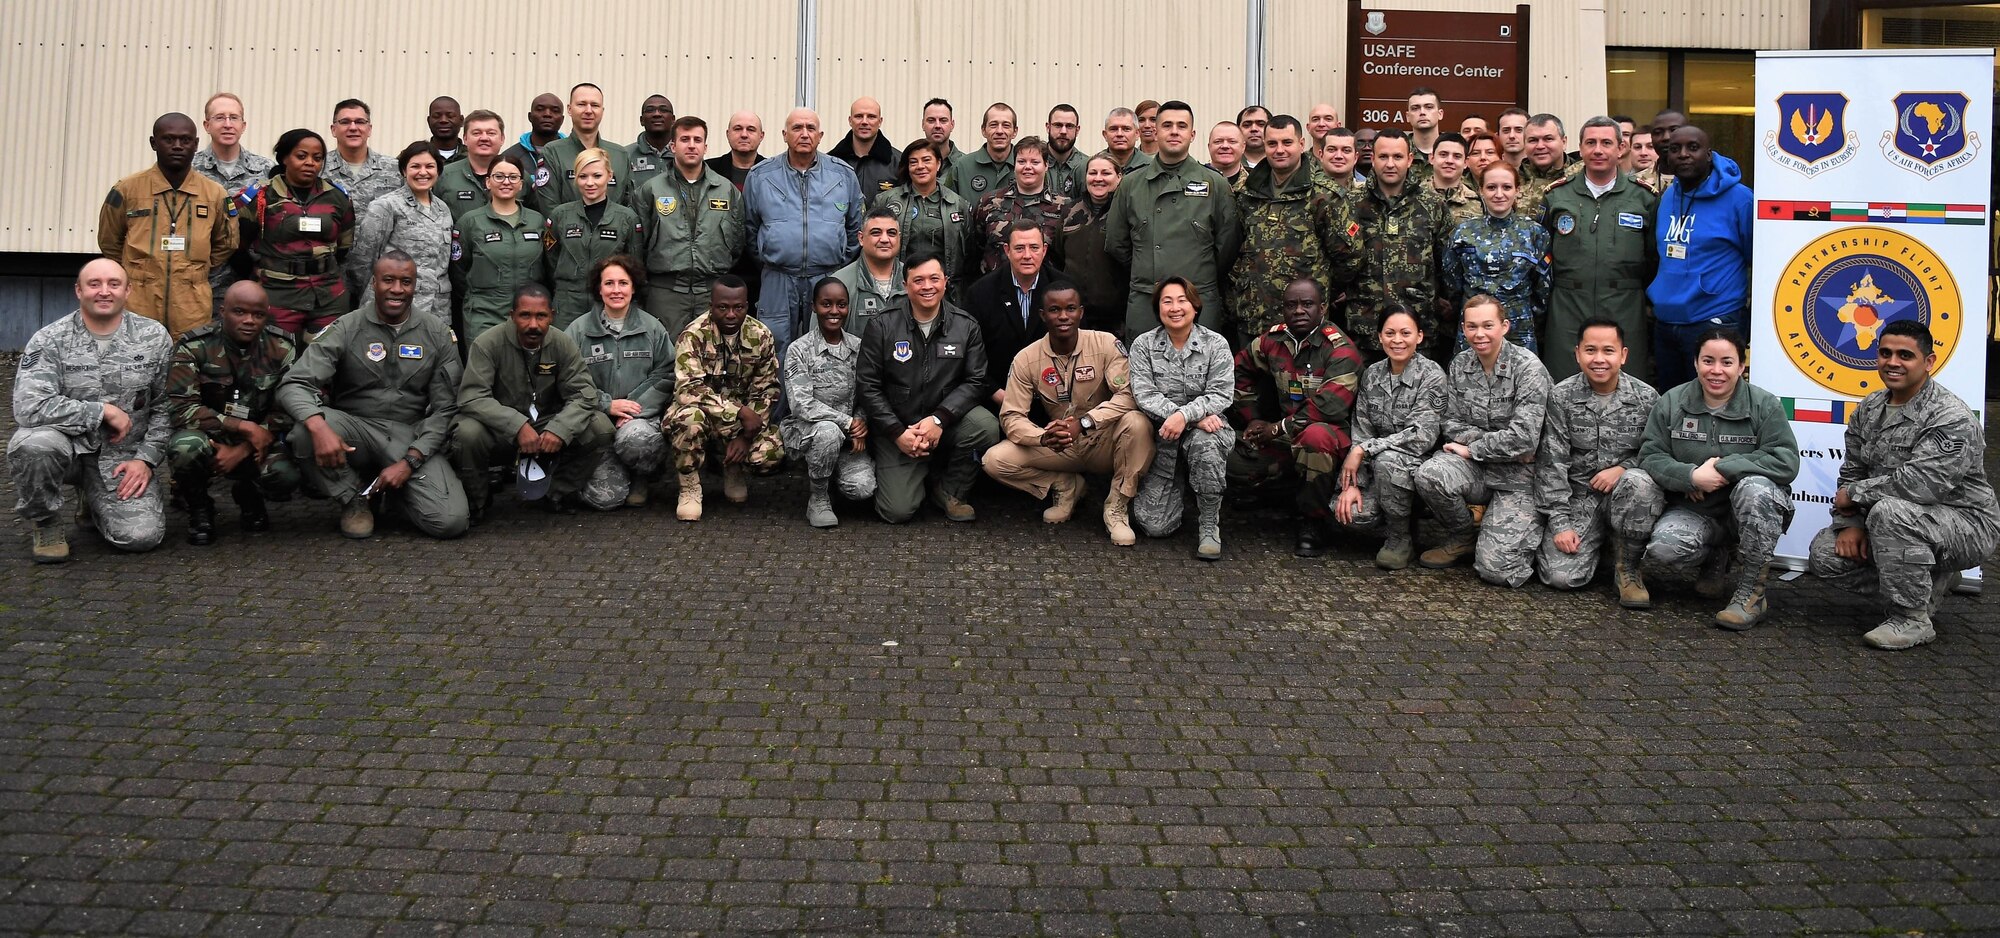 More than 50 representatives from 13 countries attended the first-ever U.S. Air Forces in Europe-Air Forces Africa Partnership Flight Symposium at Ramstein Air Base, Jan. 16, 2018. The symposium was created as a forum to share best practices and enhance cooperation between allied and partner nations. (U.S. Air Force photo by Tech. Sgt. Rachelle Coleman)